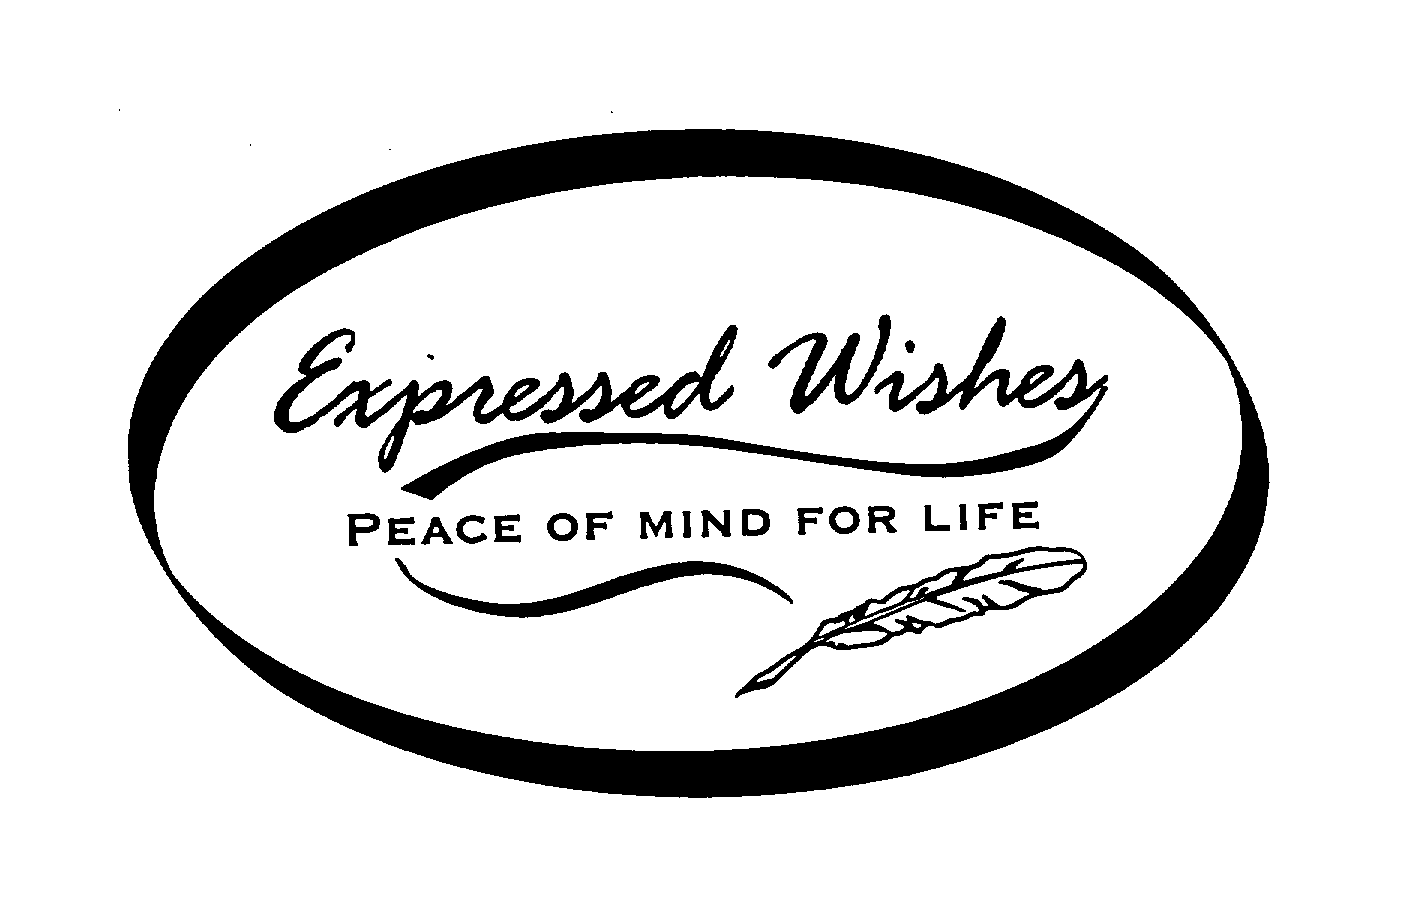  EXPRESSED WISHES, PEACE OF MIND FOR LIFE